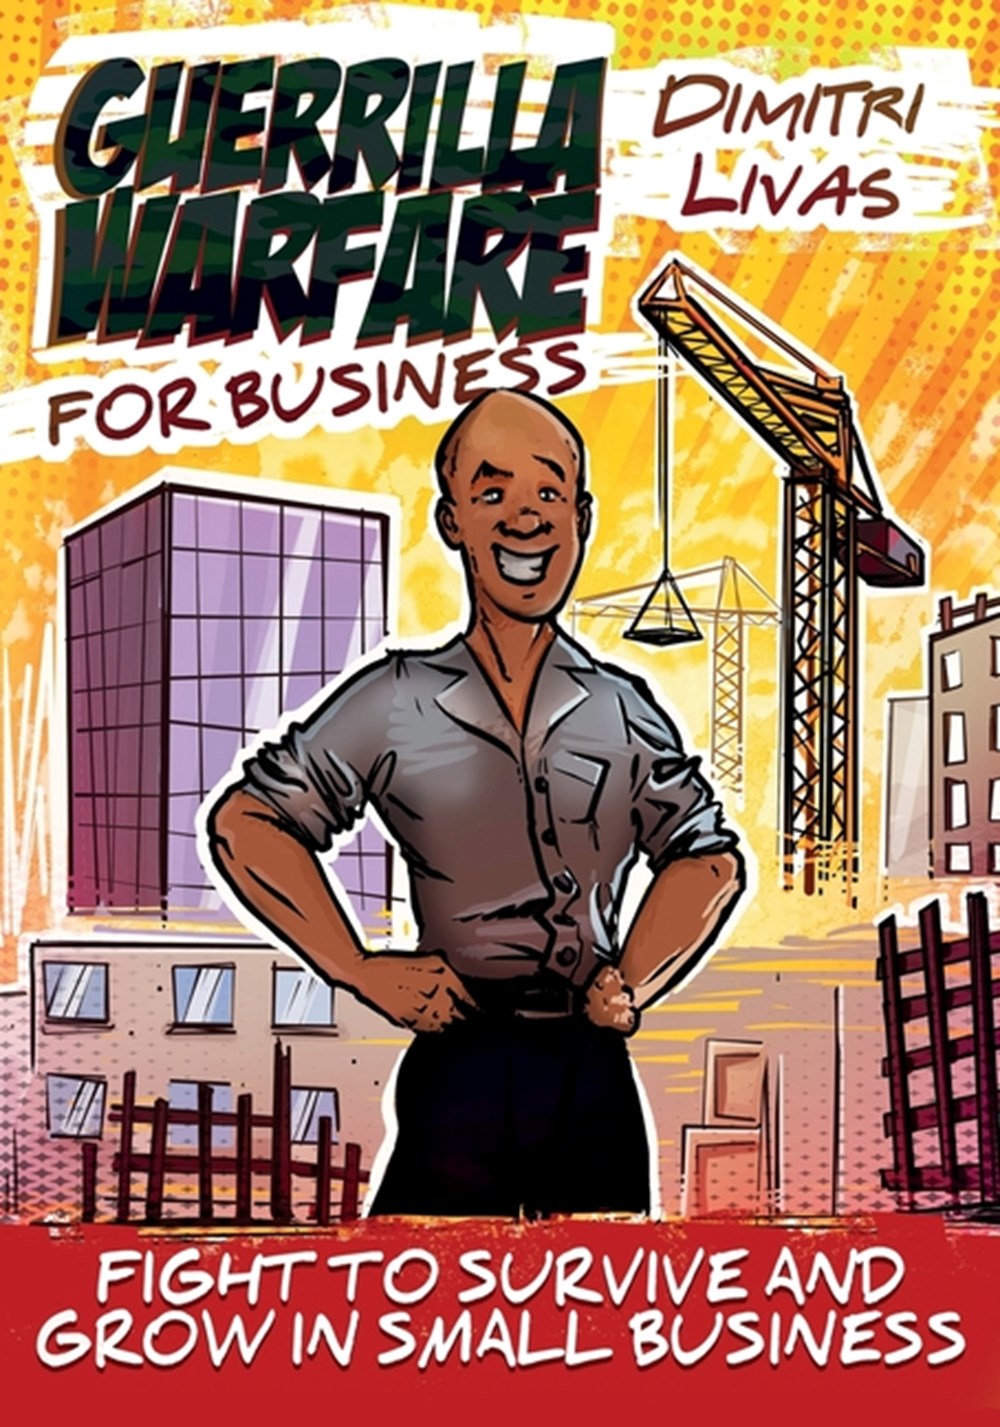 Guerrilla Warfare for Business - Comic Book Edition: Fight to Survive and Grow in Small Business